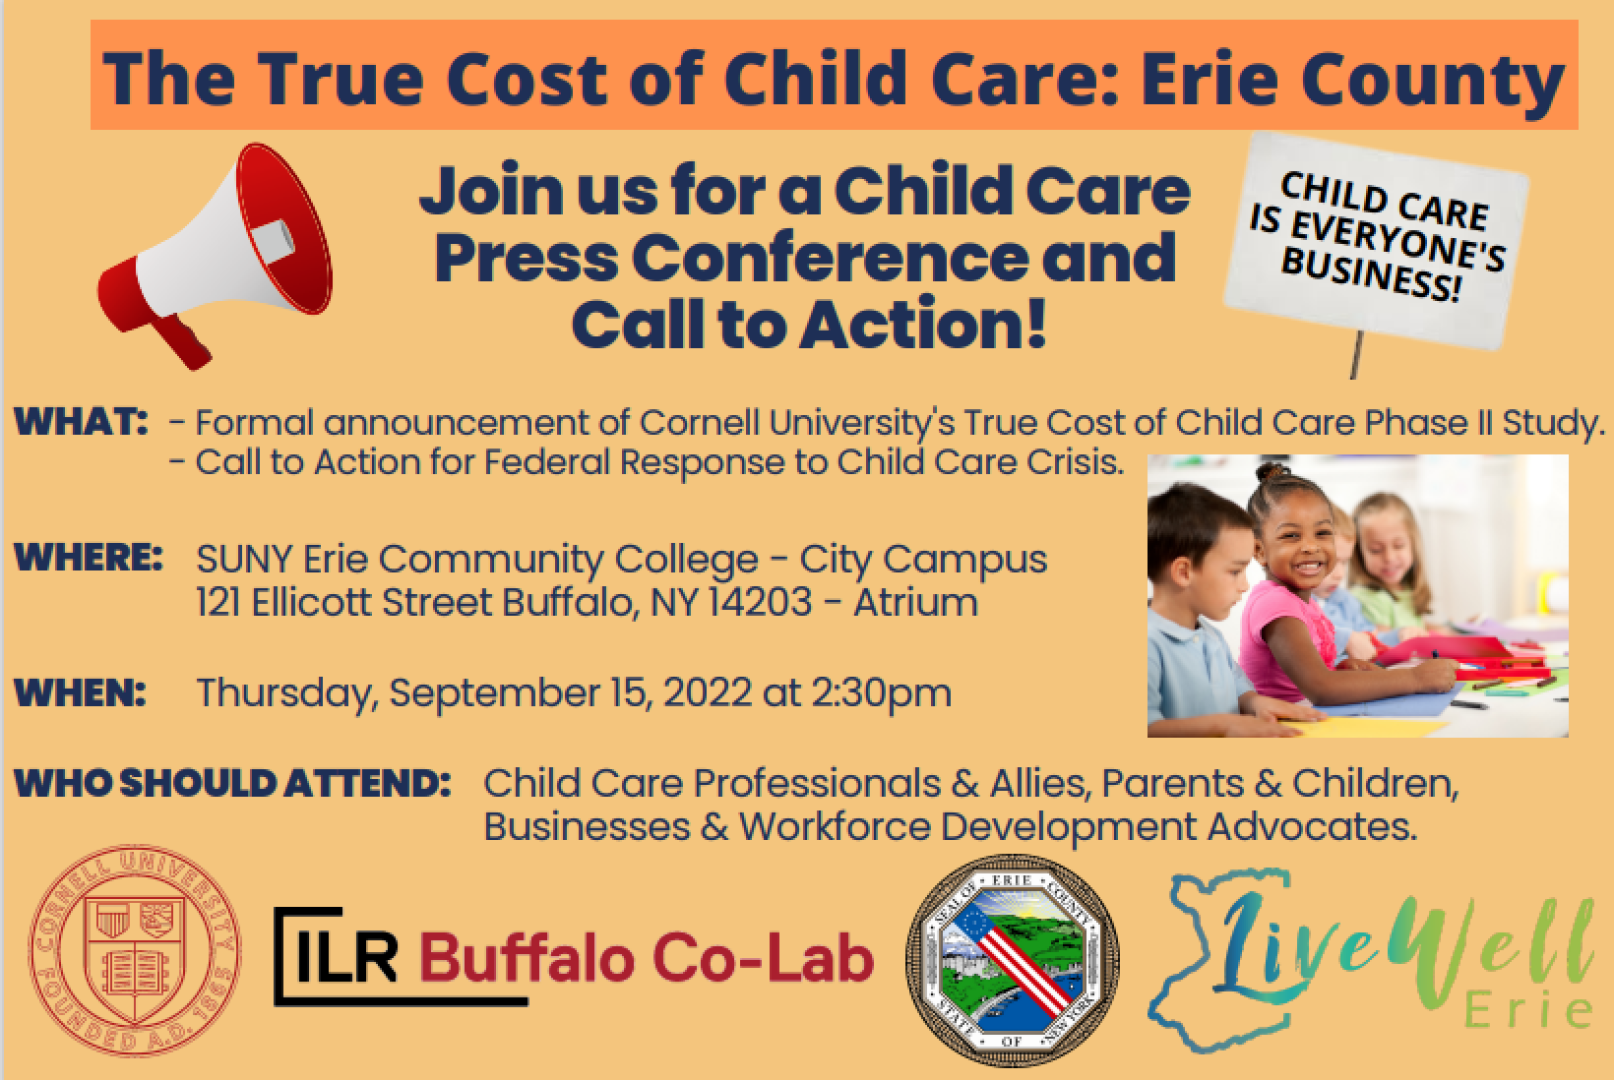 The True Cost of Child Care in Erie County